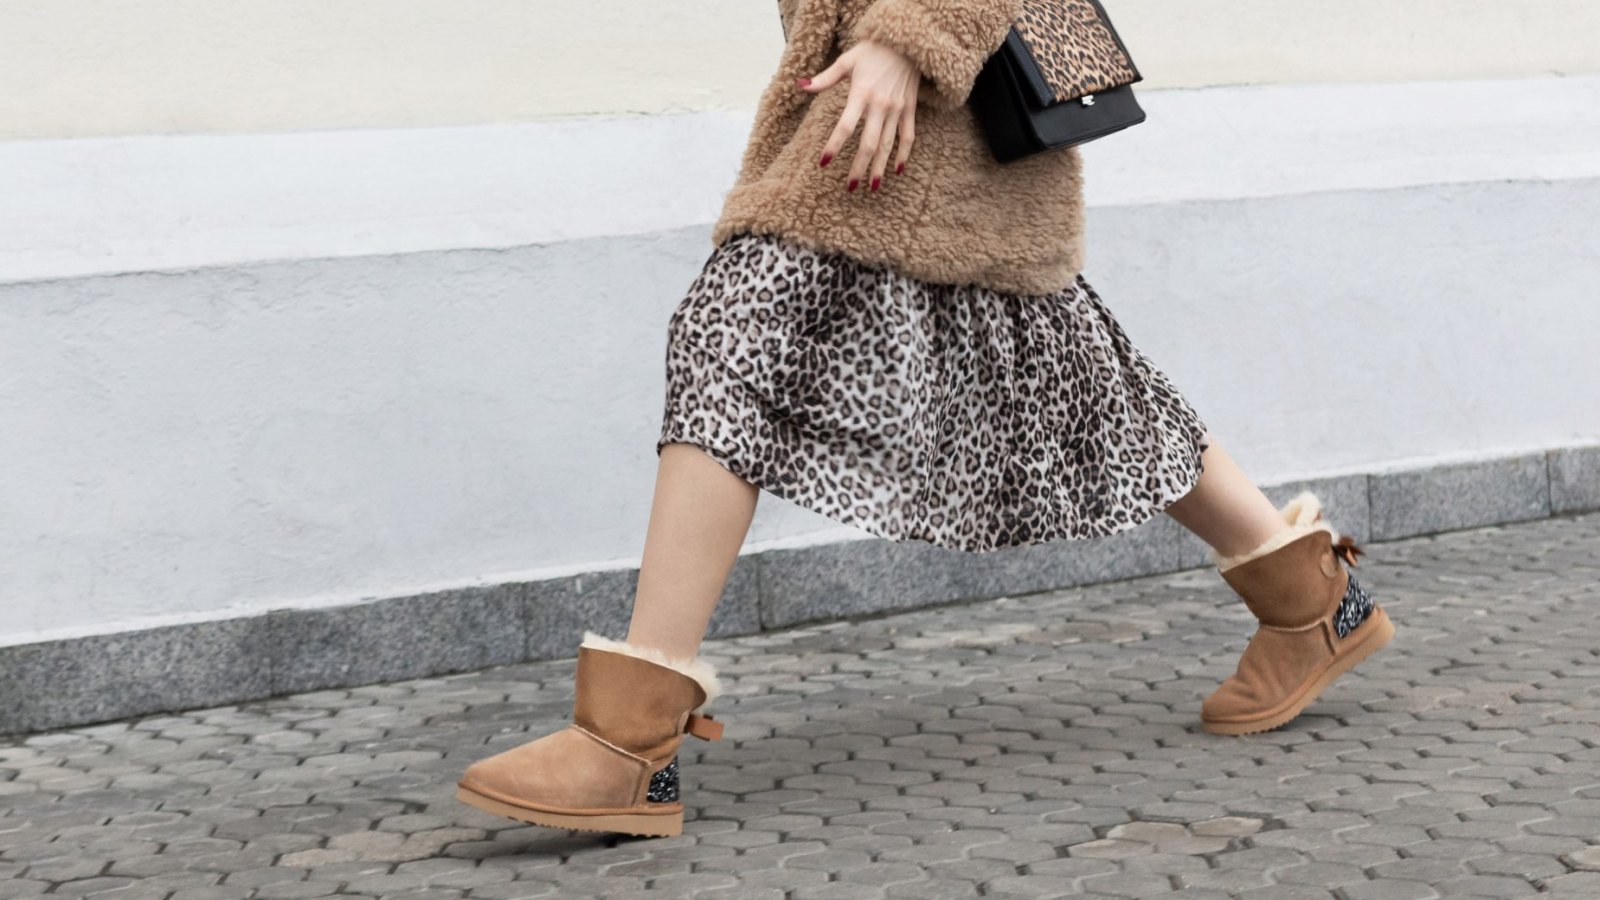 35 Best Ugg slippers outfit ideas  slippers outfit, ugg slippers, ugg  slippers outfit